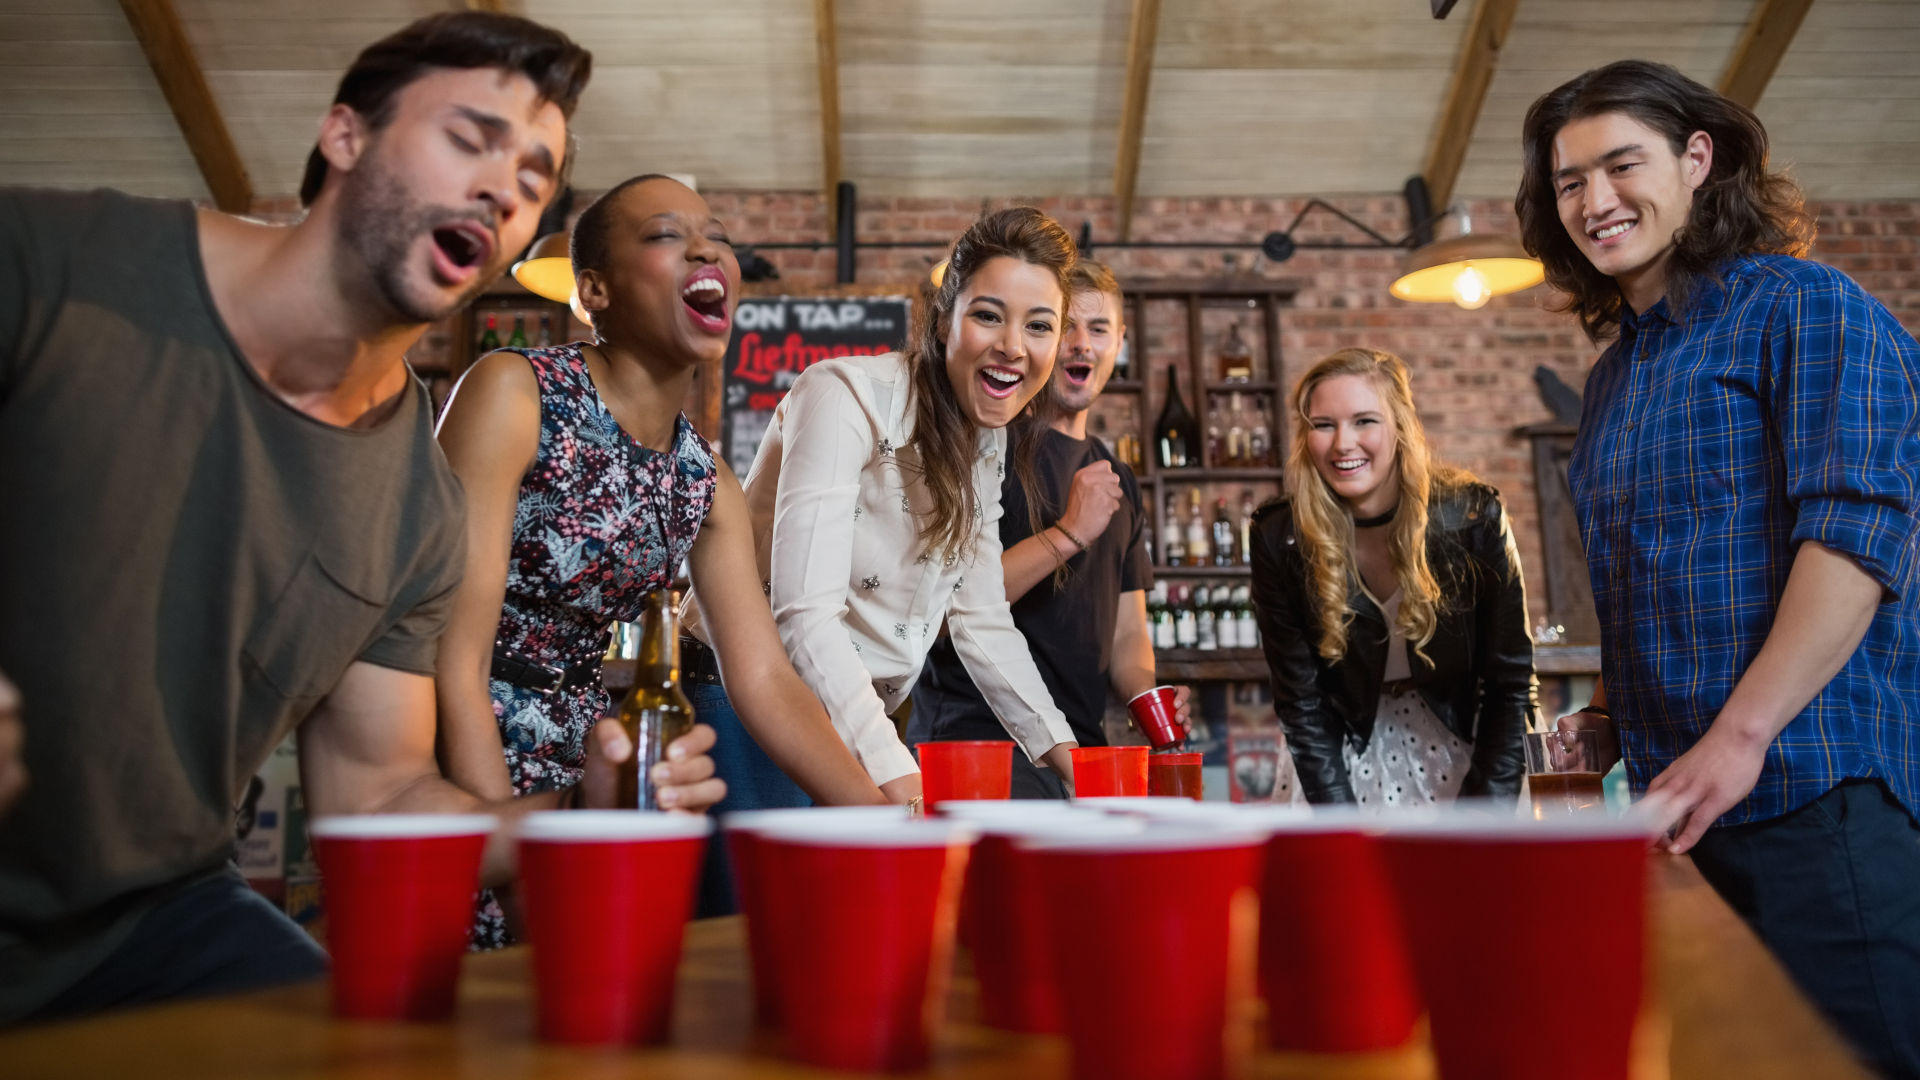 How To Play Beer Pong: Rules, Tricks and More